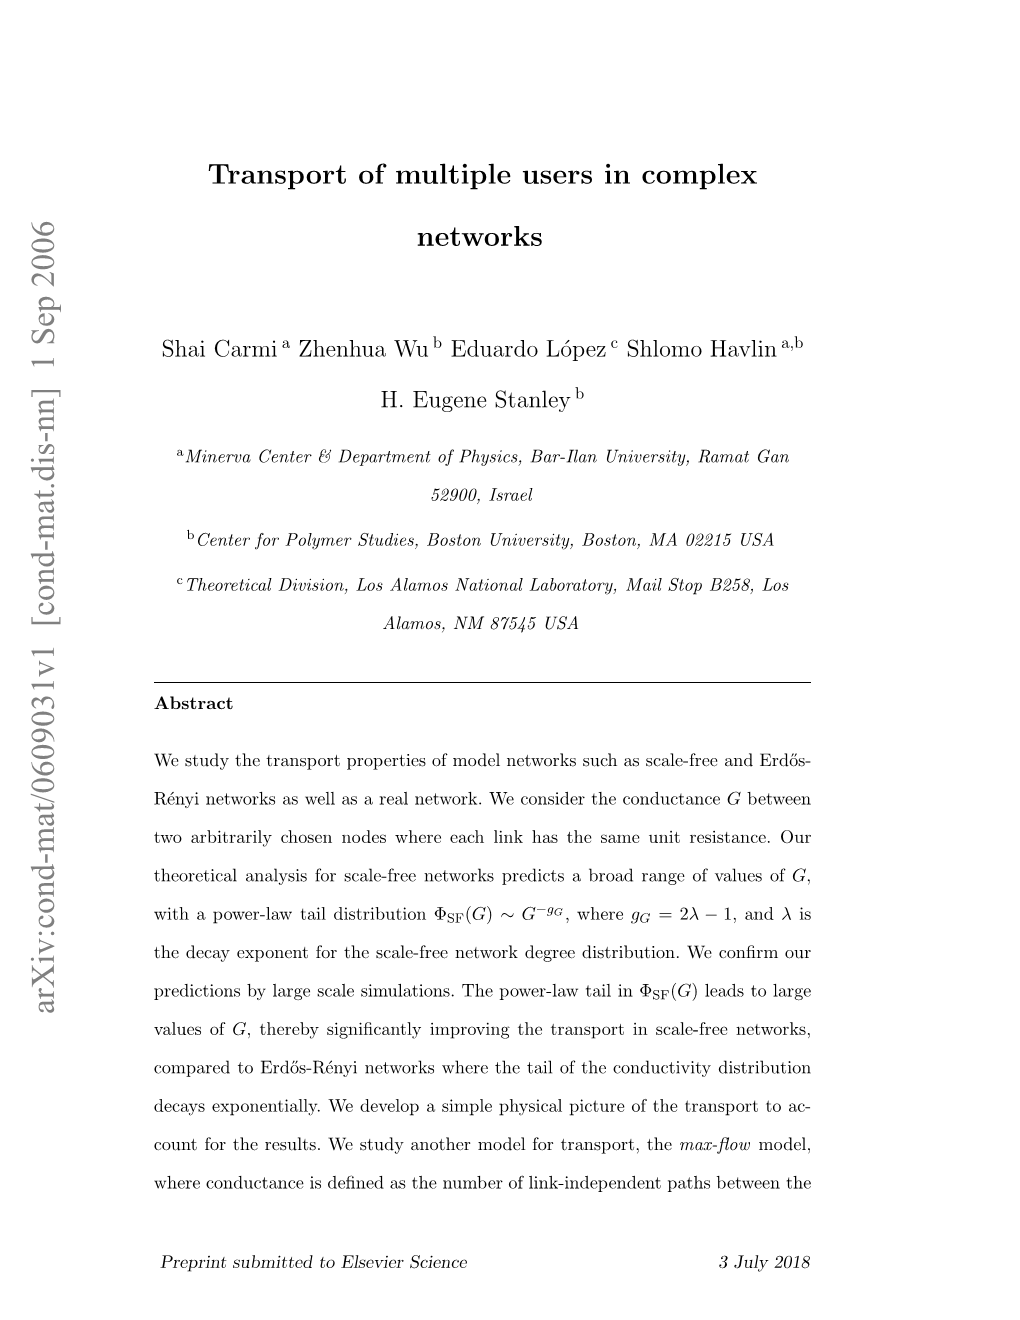 Transport of Multiple Users in Complex Networks